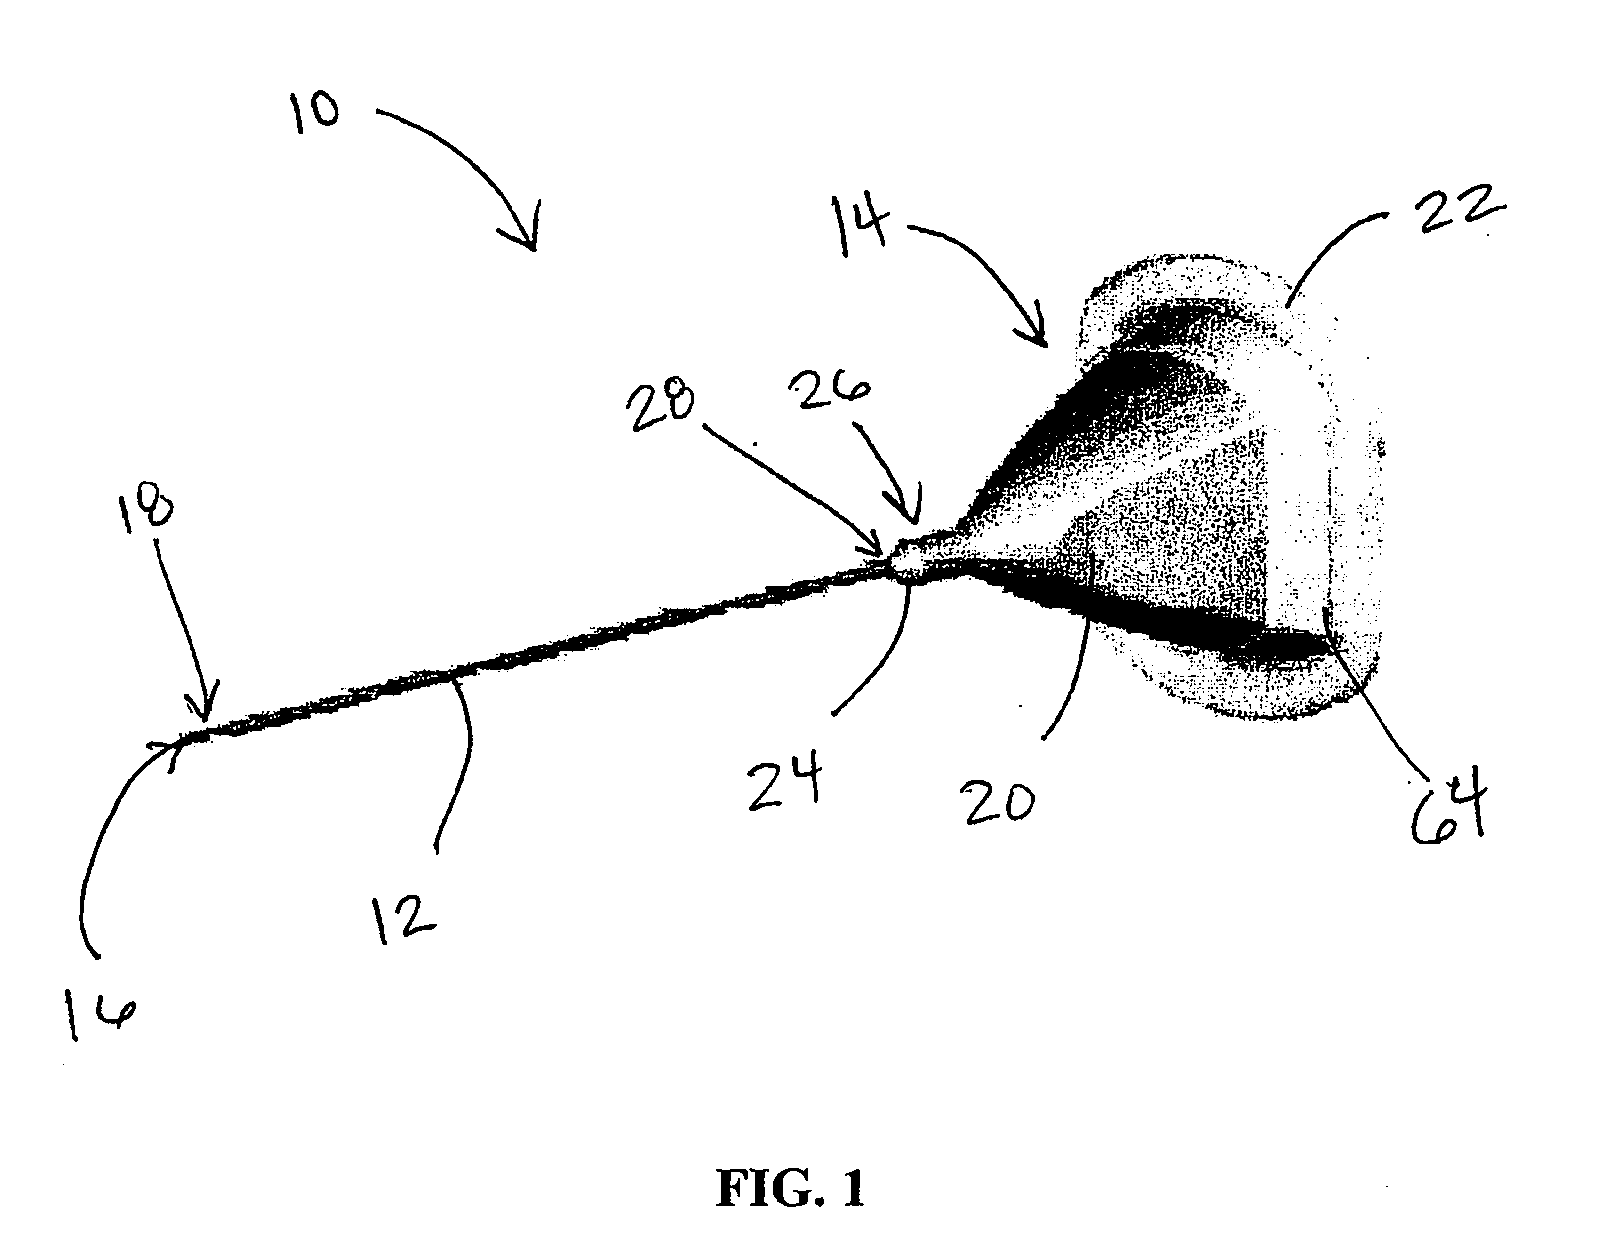 Disposable Sheath for Use with an Imaging System